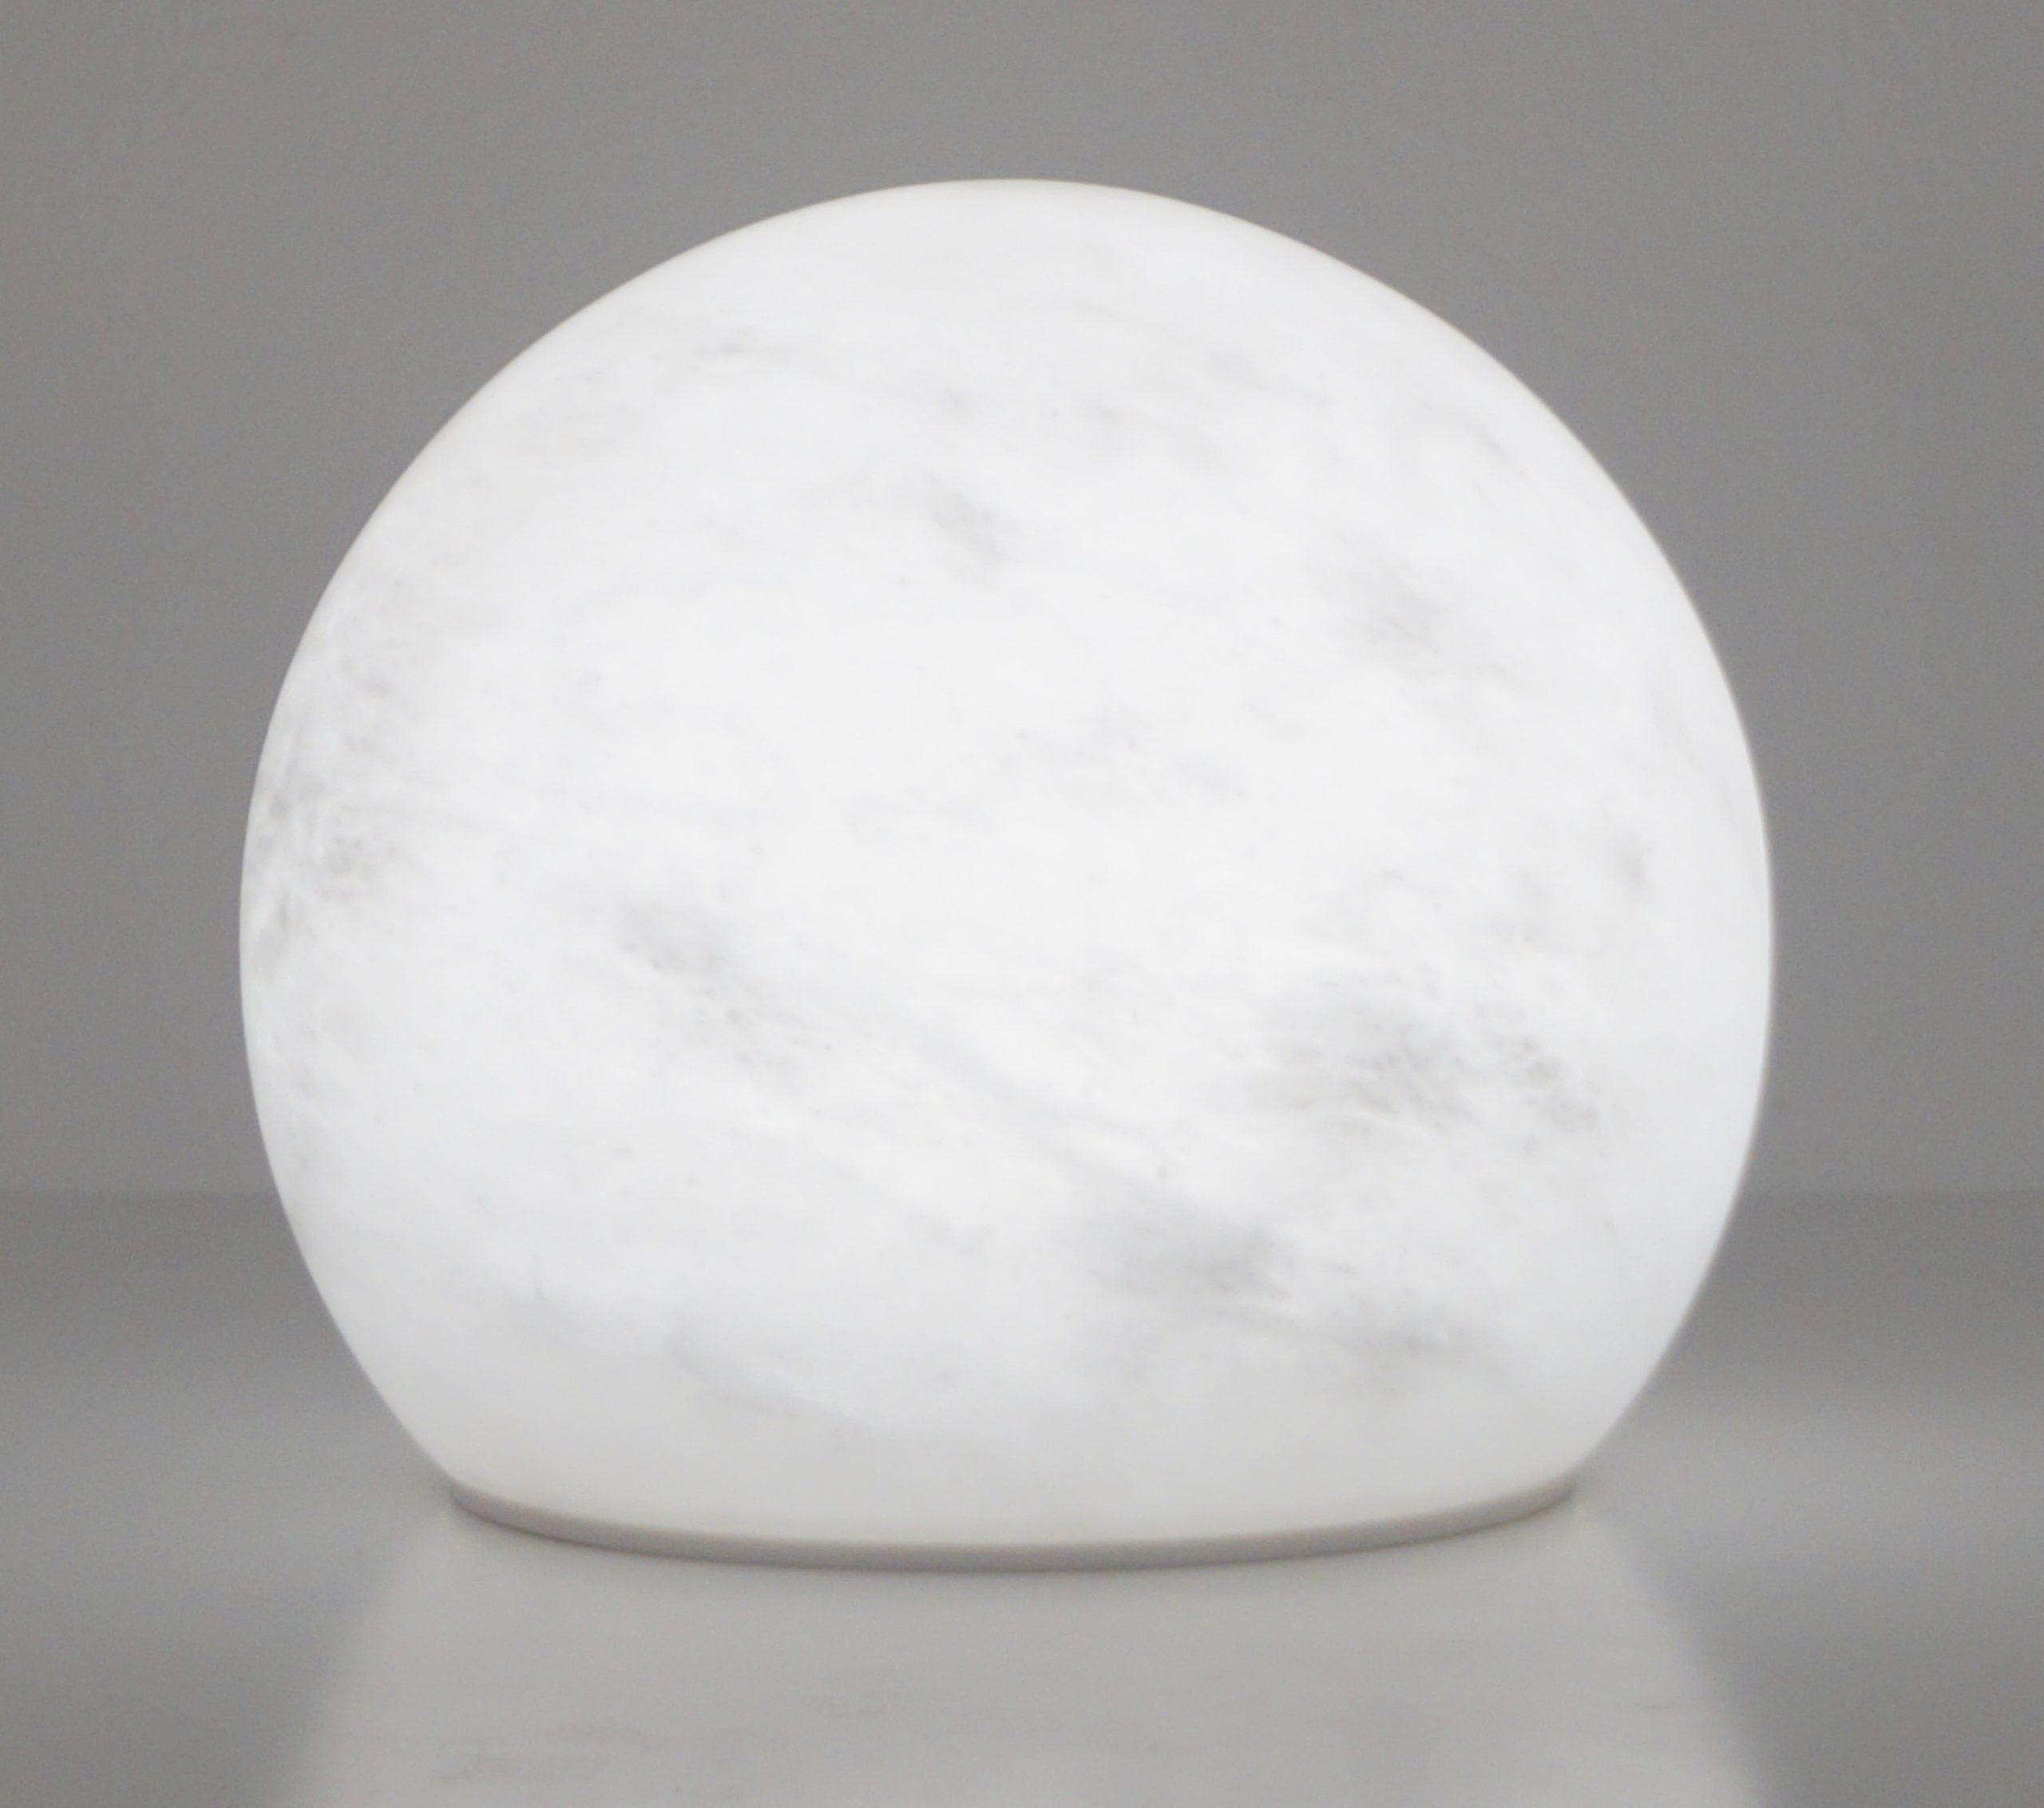 cosulich_interiors_and_antiques_products_new_york_design_Bespoke_Italian_Minimalist_White_Alabaster_Moon_Wireless_Round_Table_1-scaled-1